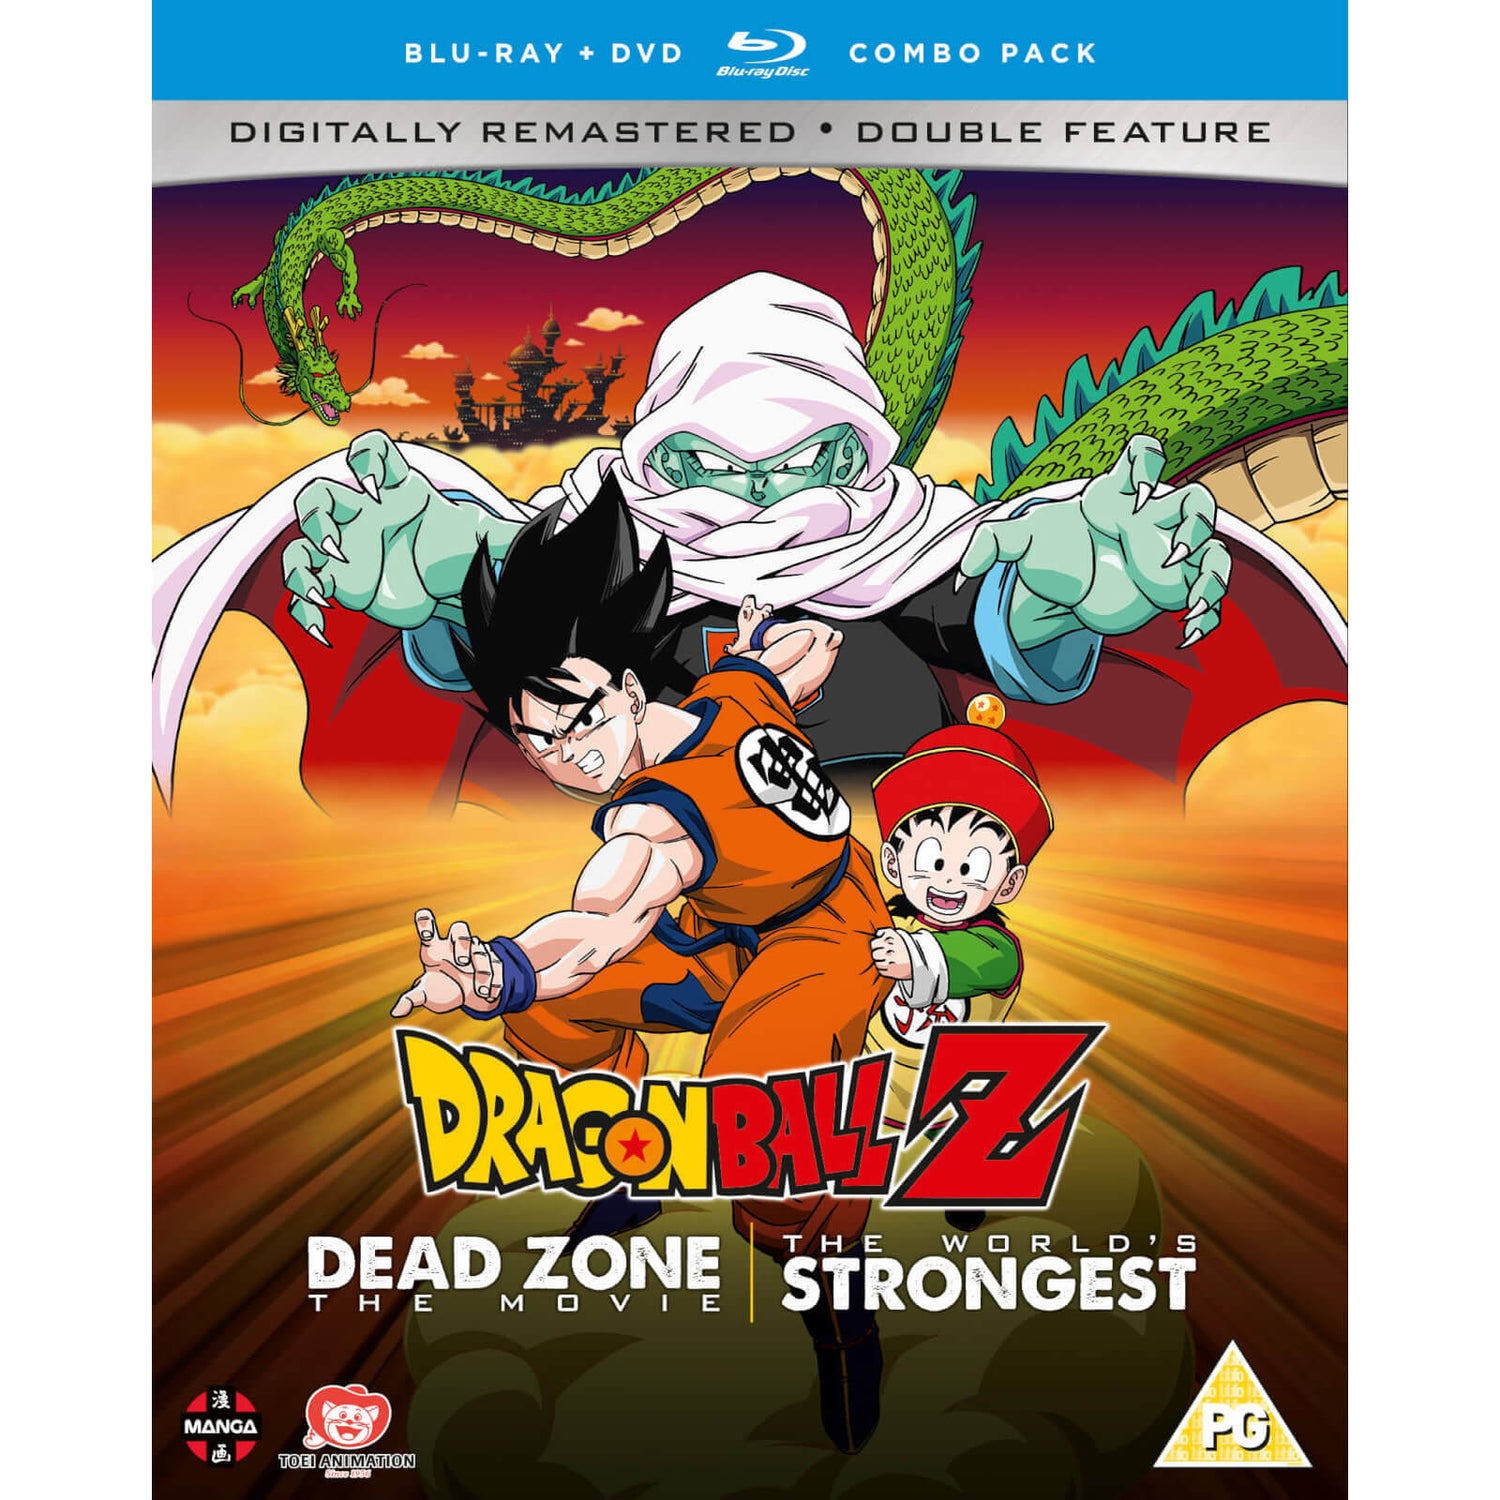 Dragon Ball Z Movie Collectie een: Dead Zone/The World's Strongest